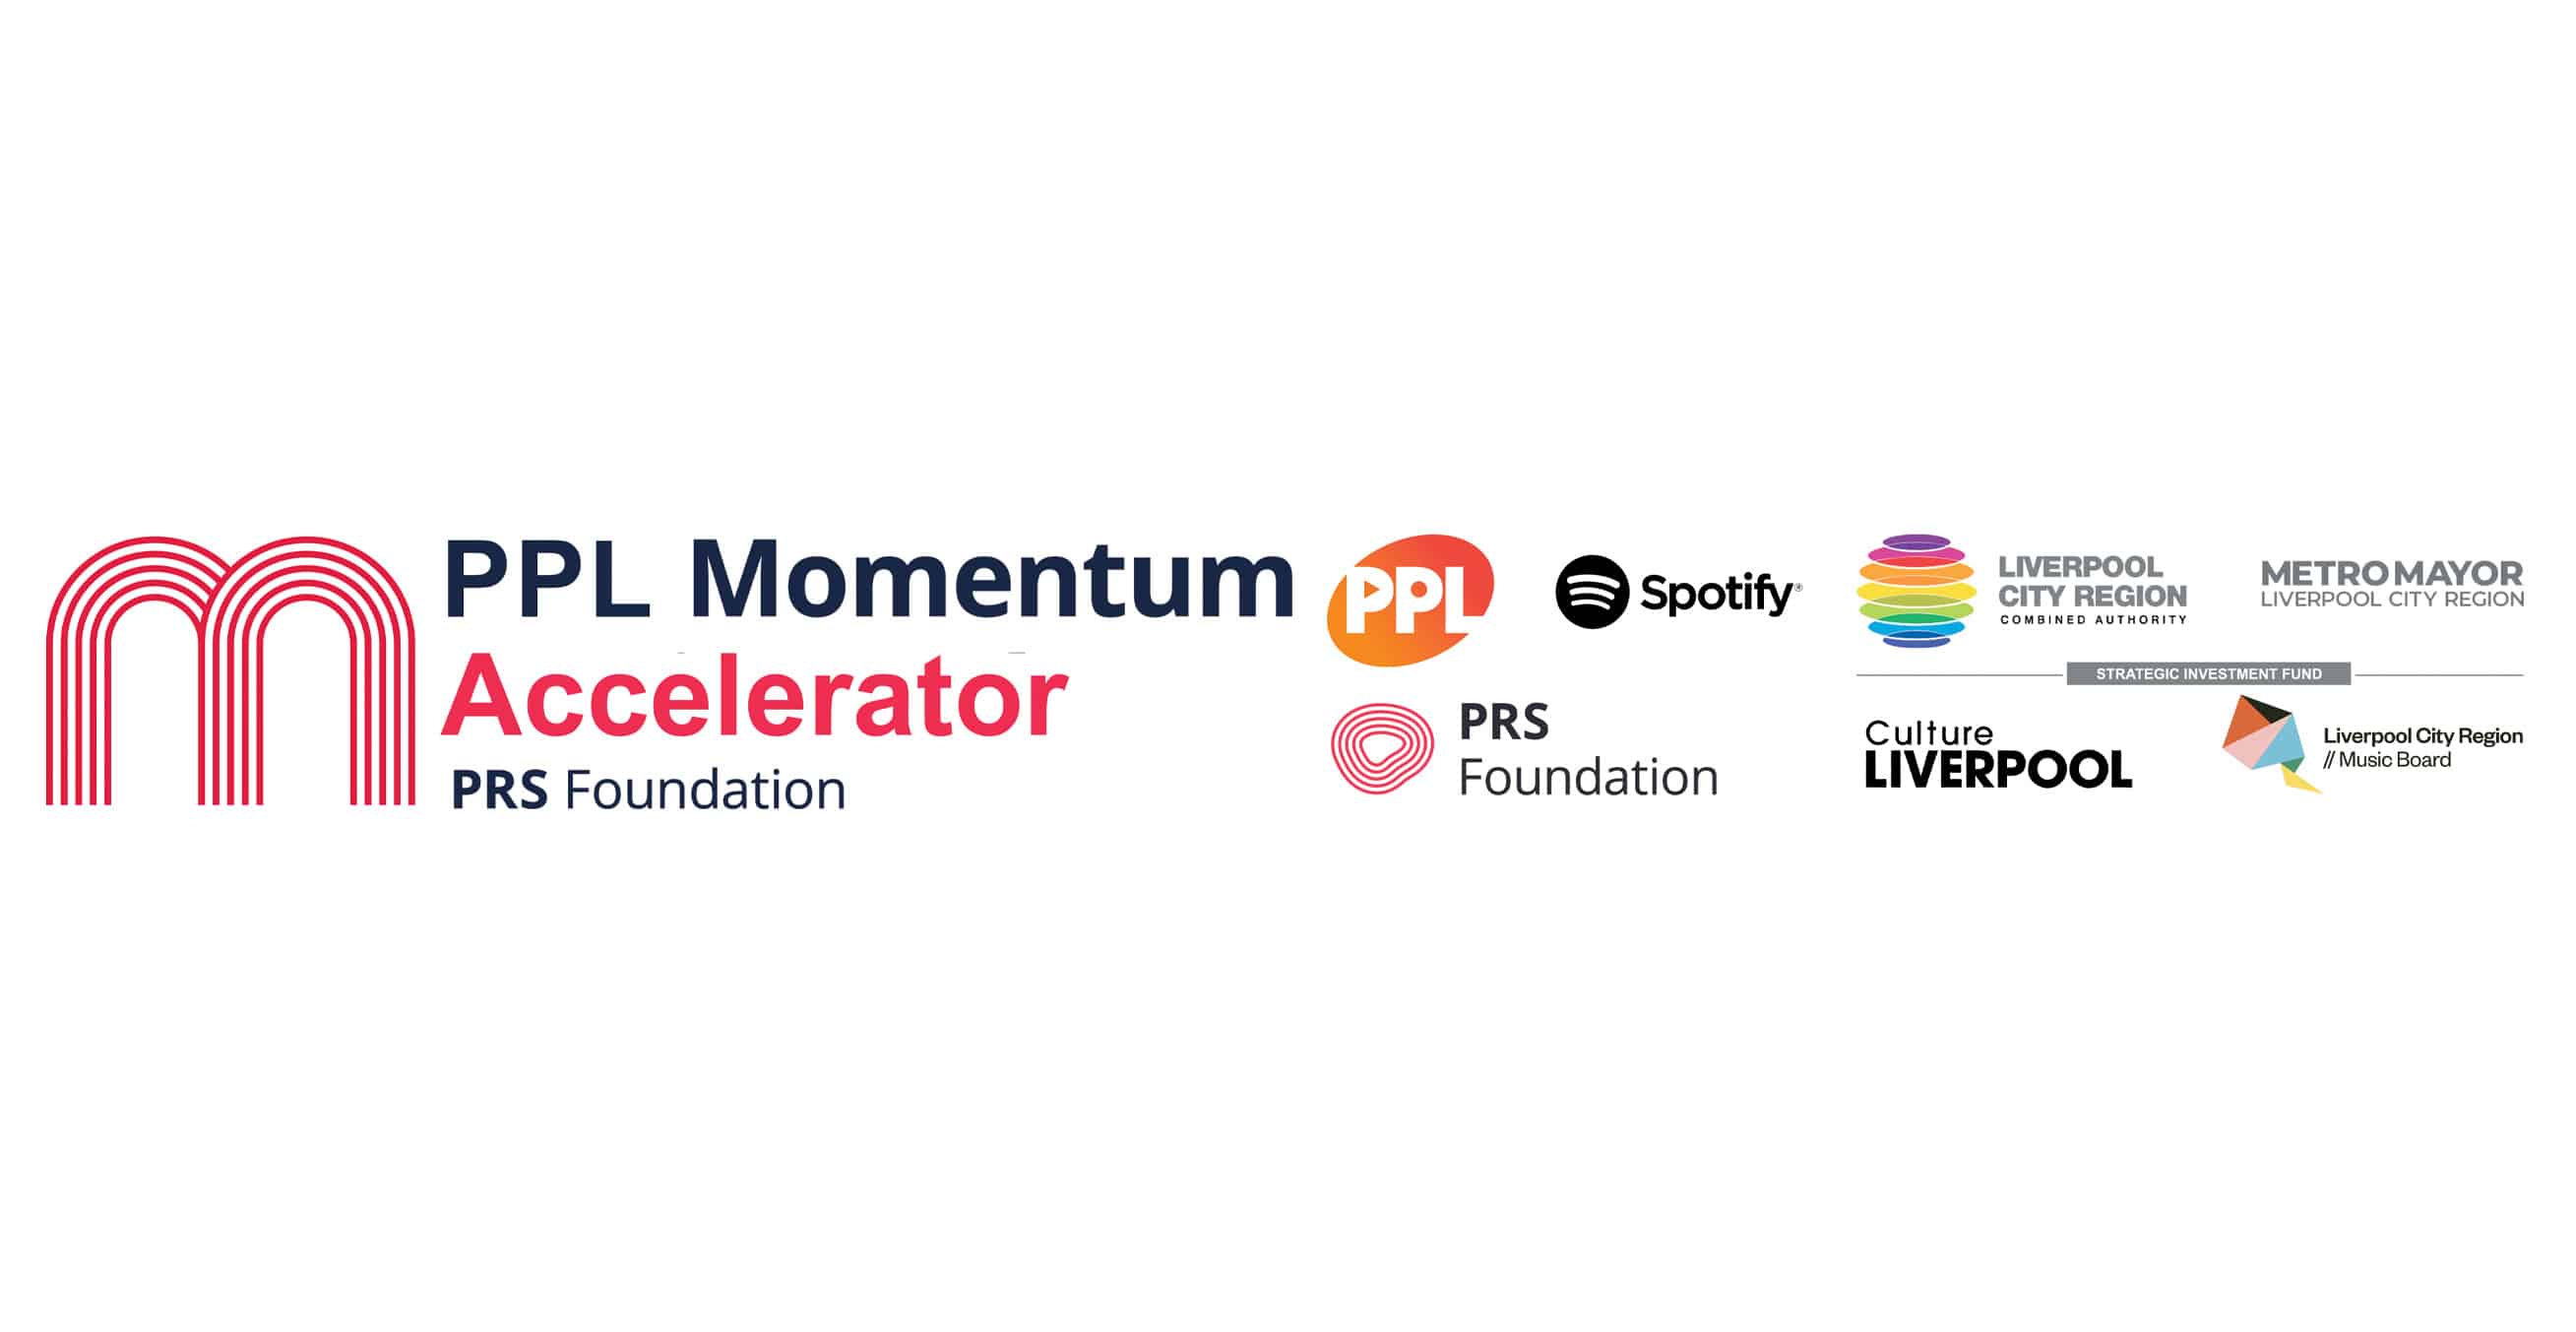 prs foundation announces the music creators and future industry professionals from the liverpool city region supported through the ppl momentum accelerator fund